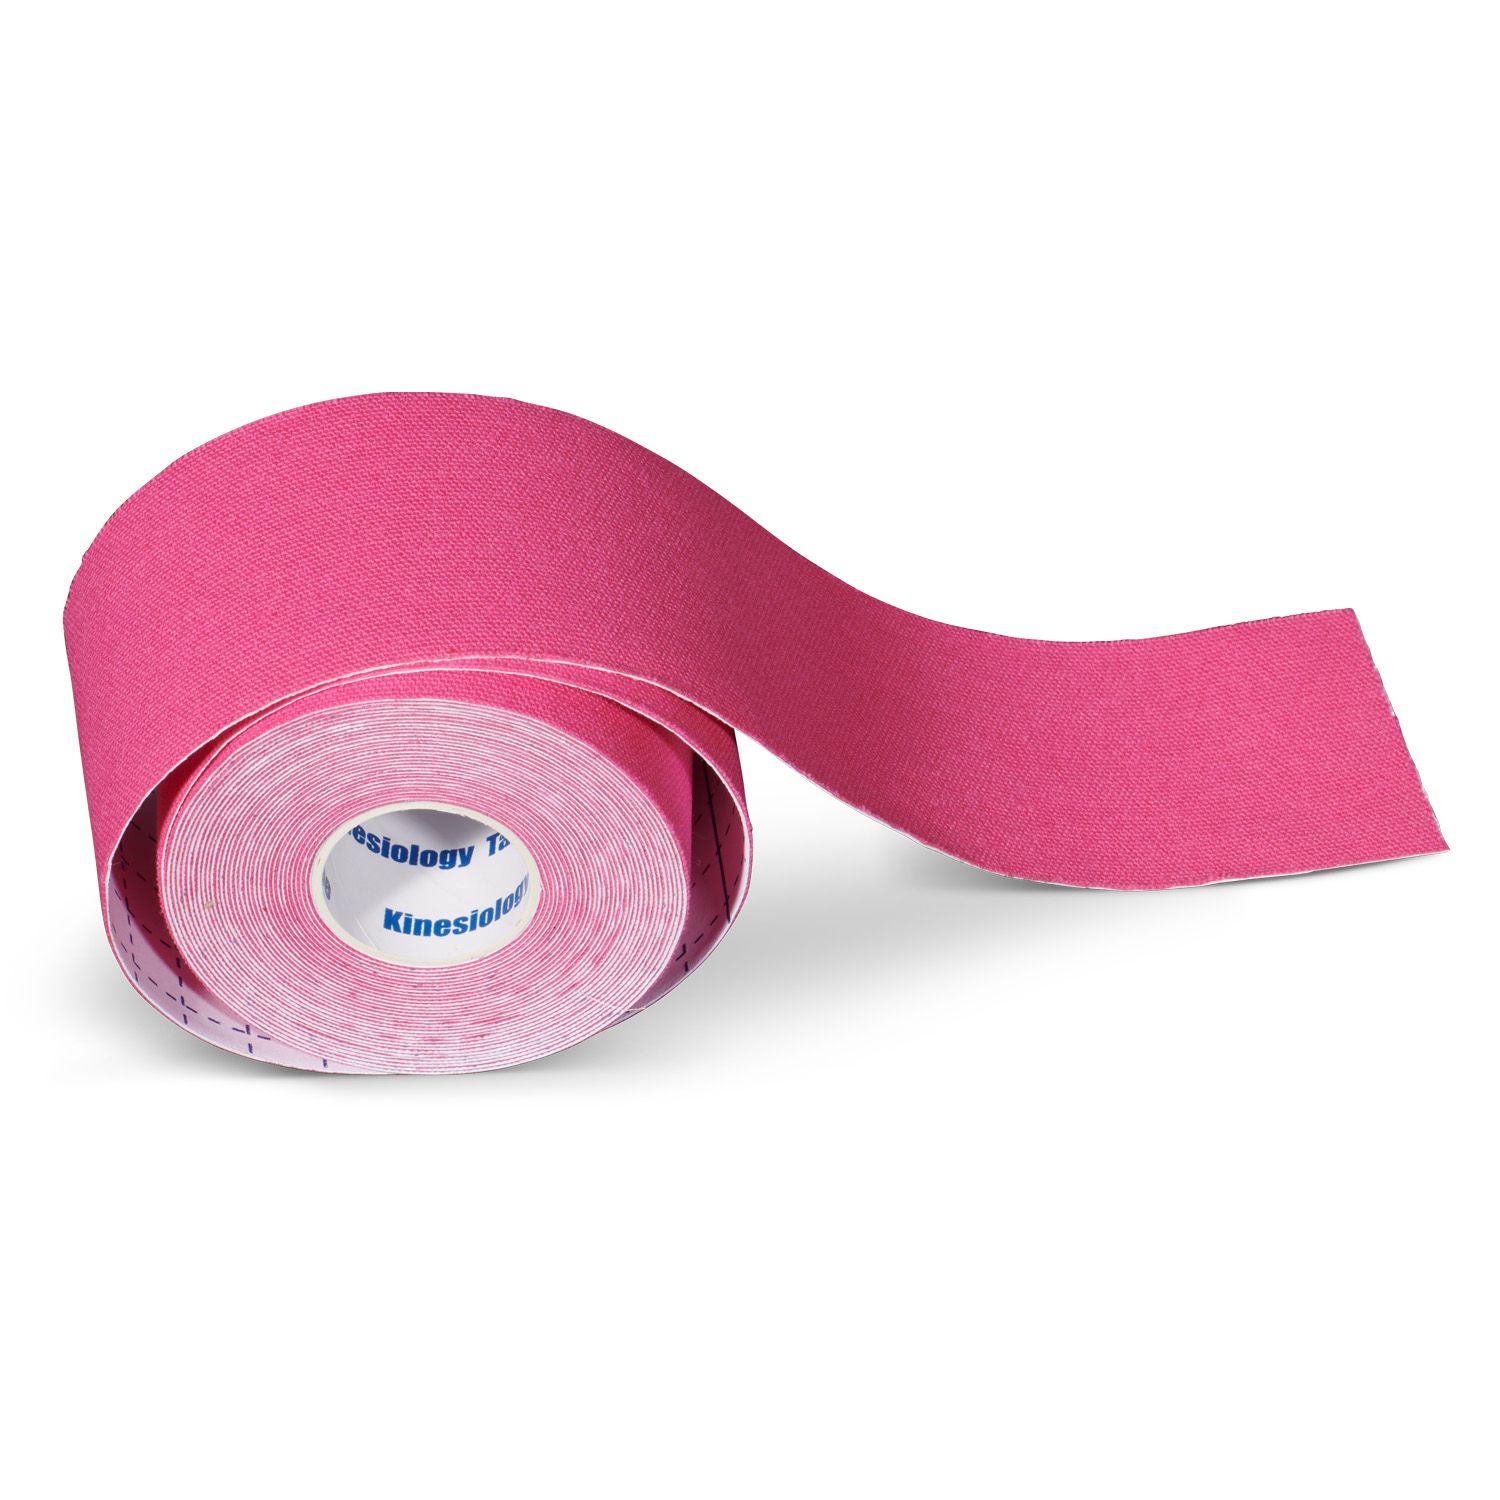 kinesiology tape 4 rolls plus 1 roll for free pink